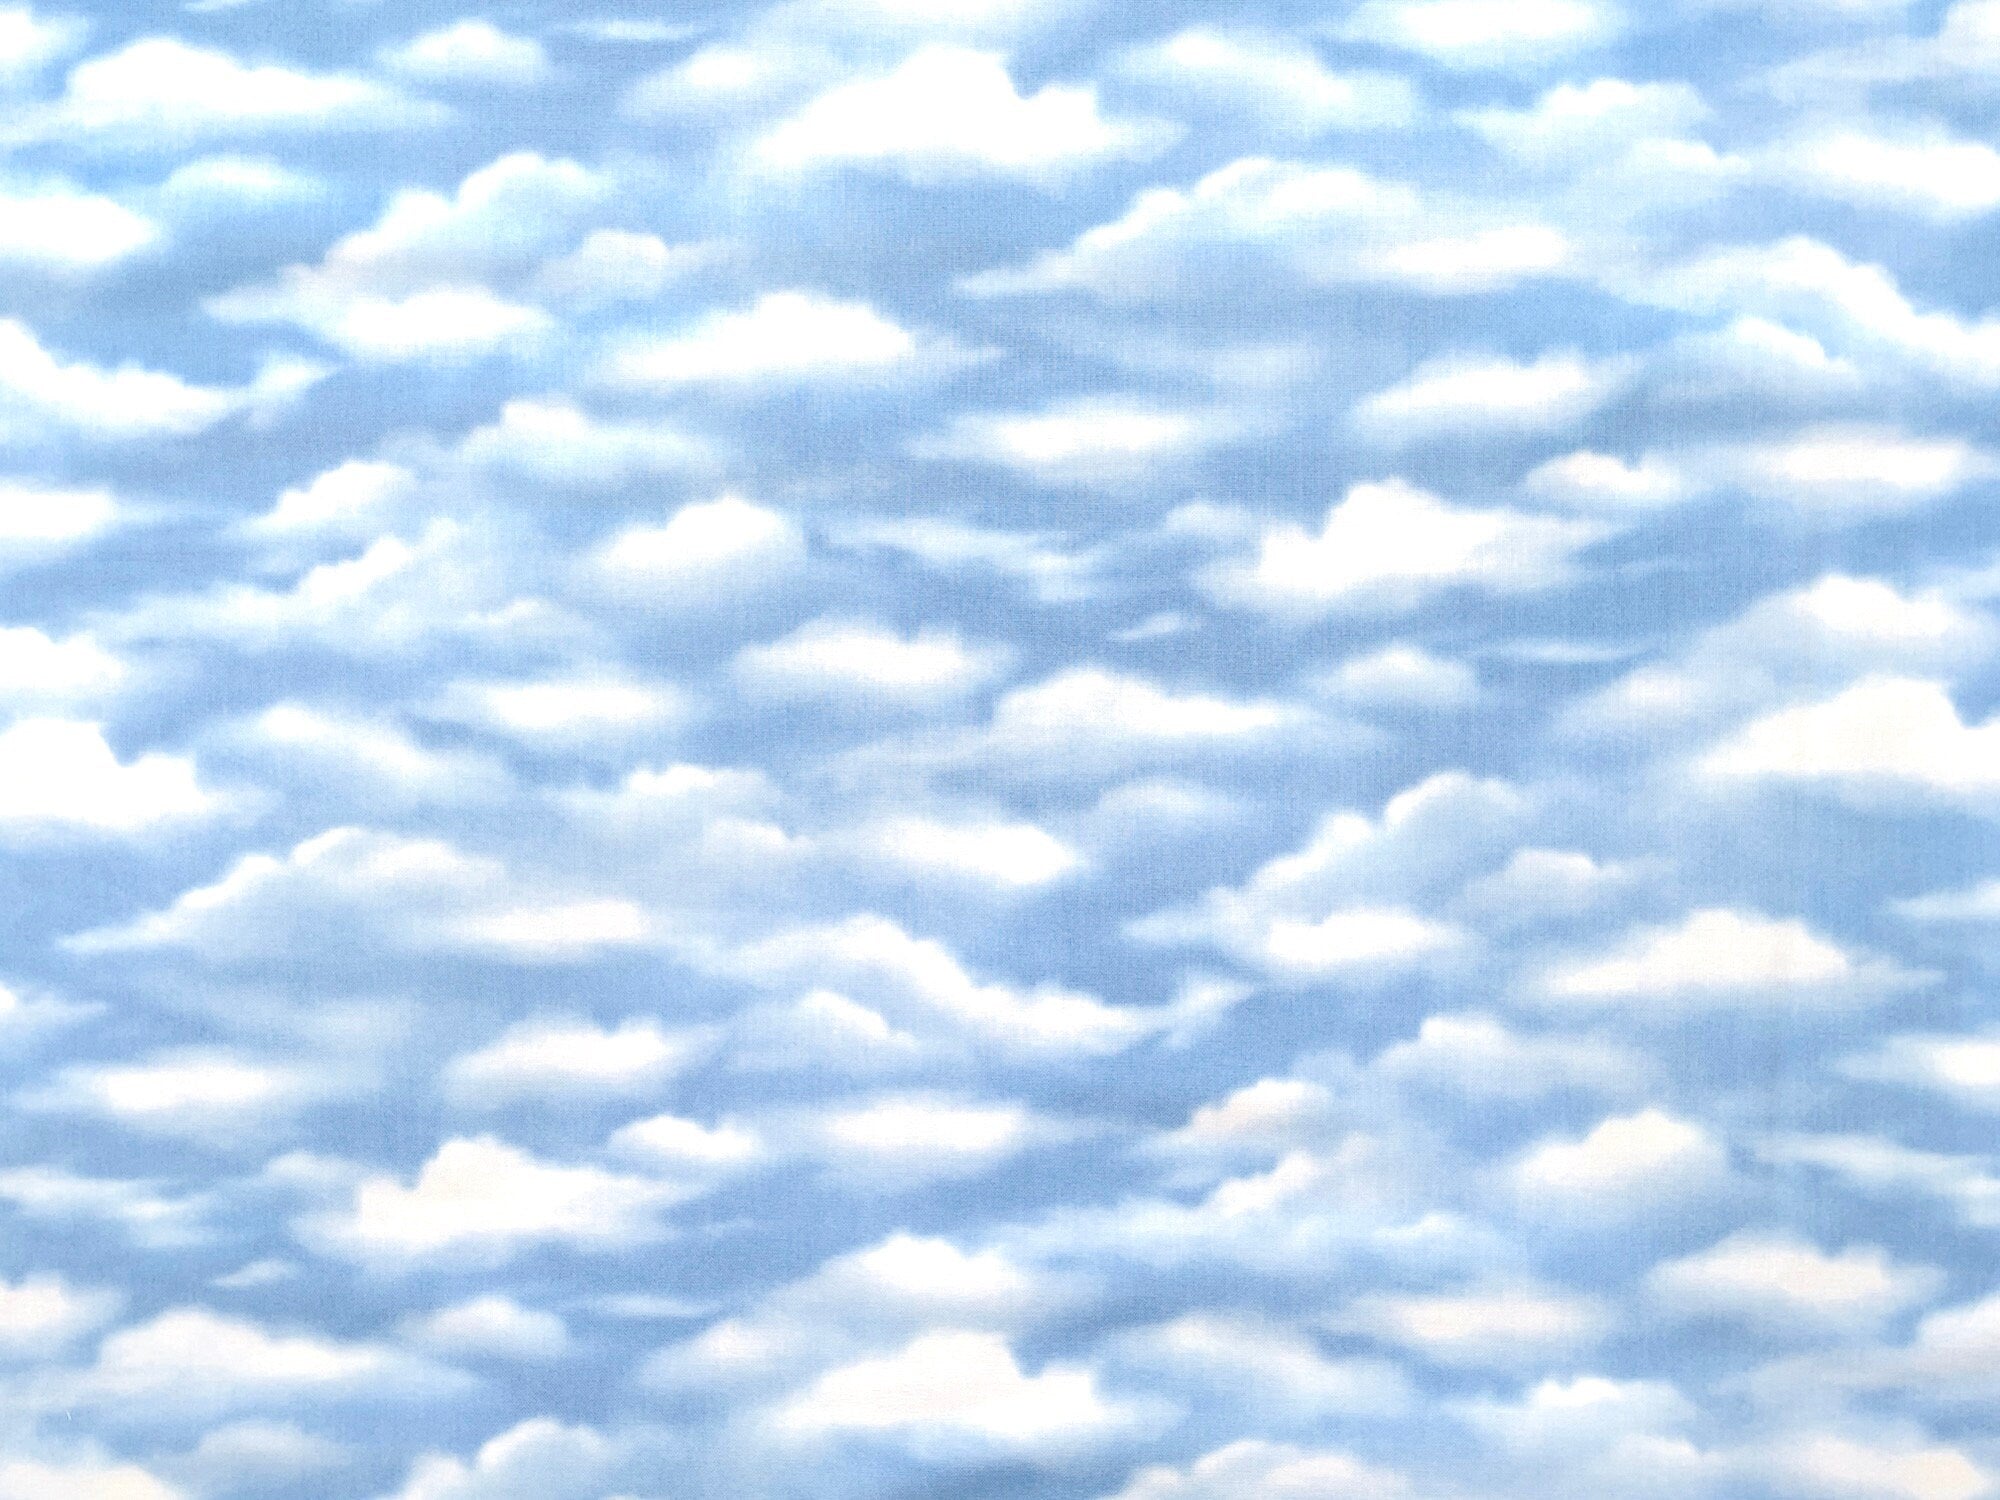 Cotton fabric covered with clouds in the sky. This fabric is called A New Adventure